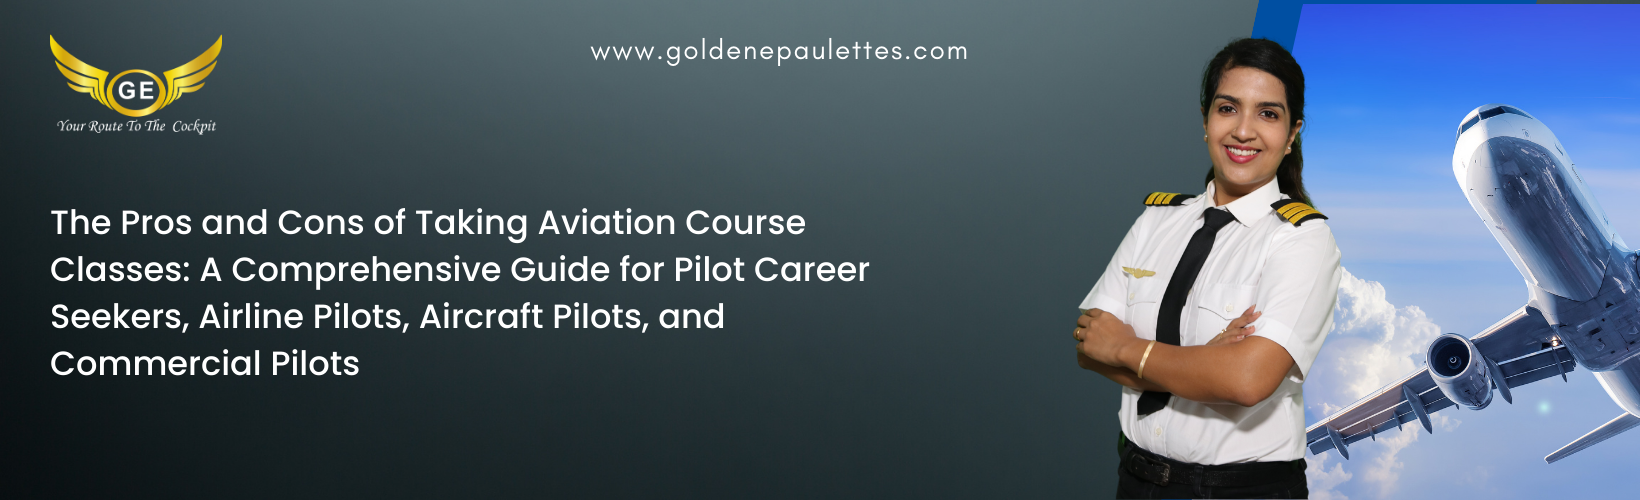 How to Find the Right Aviation Course Classes